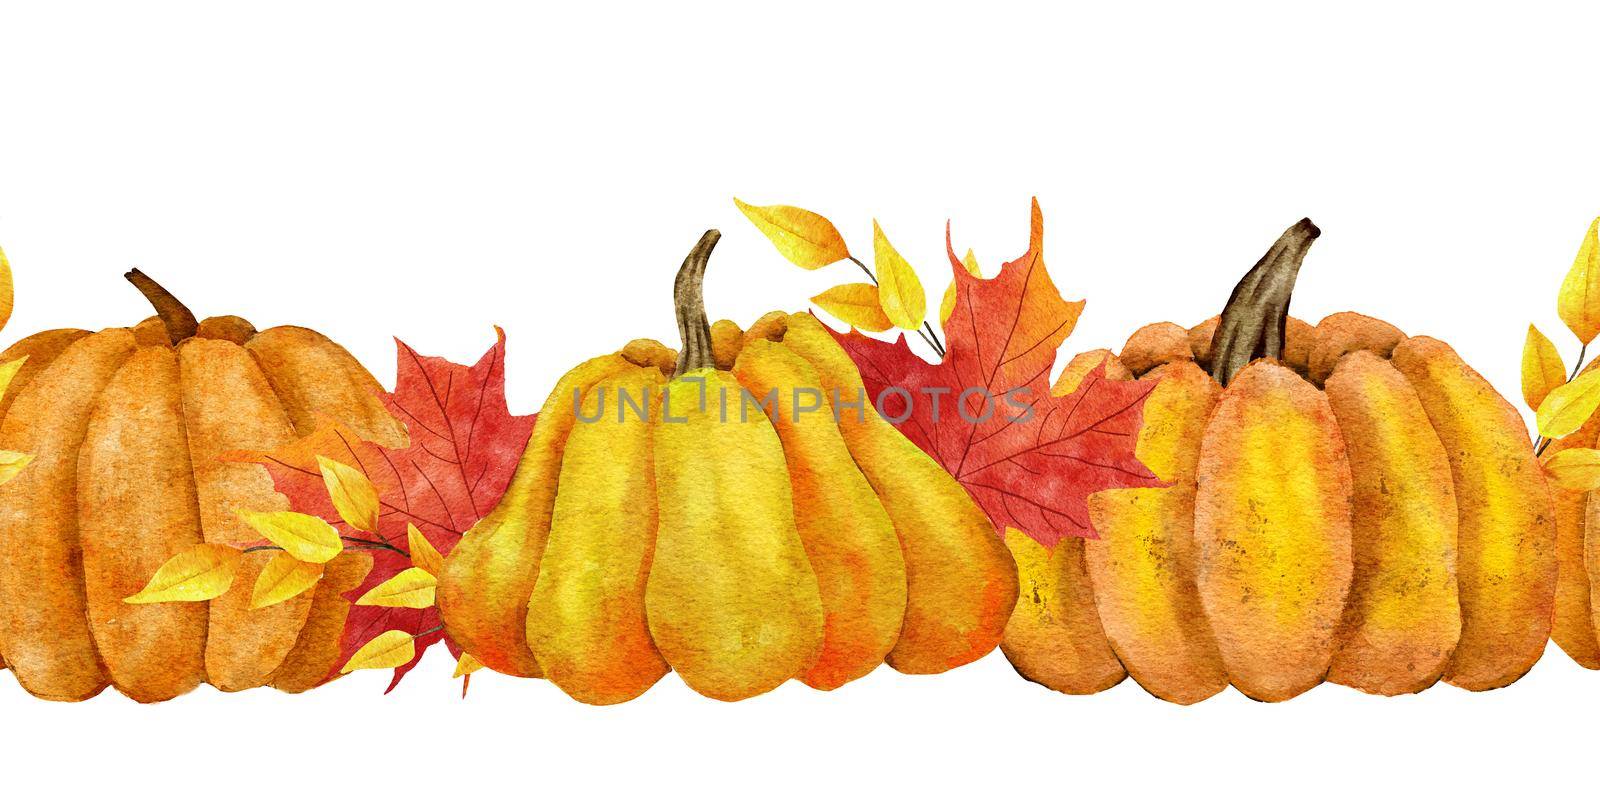 Watercolor hand drawn seamless horizontal border with yellow pumpkings fall autumn leaves. Thanksgiving frame background banner, october november harvest farm cottage art